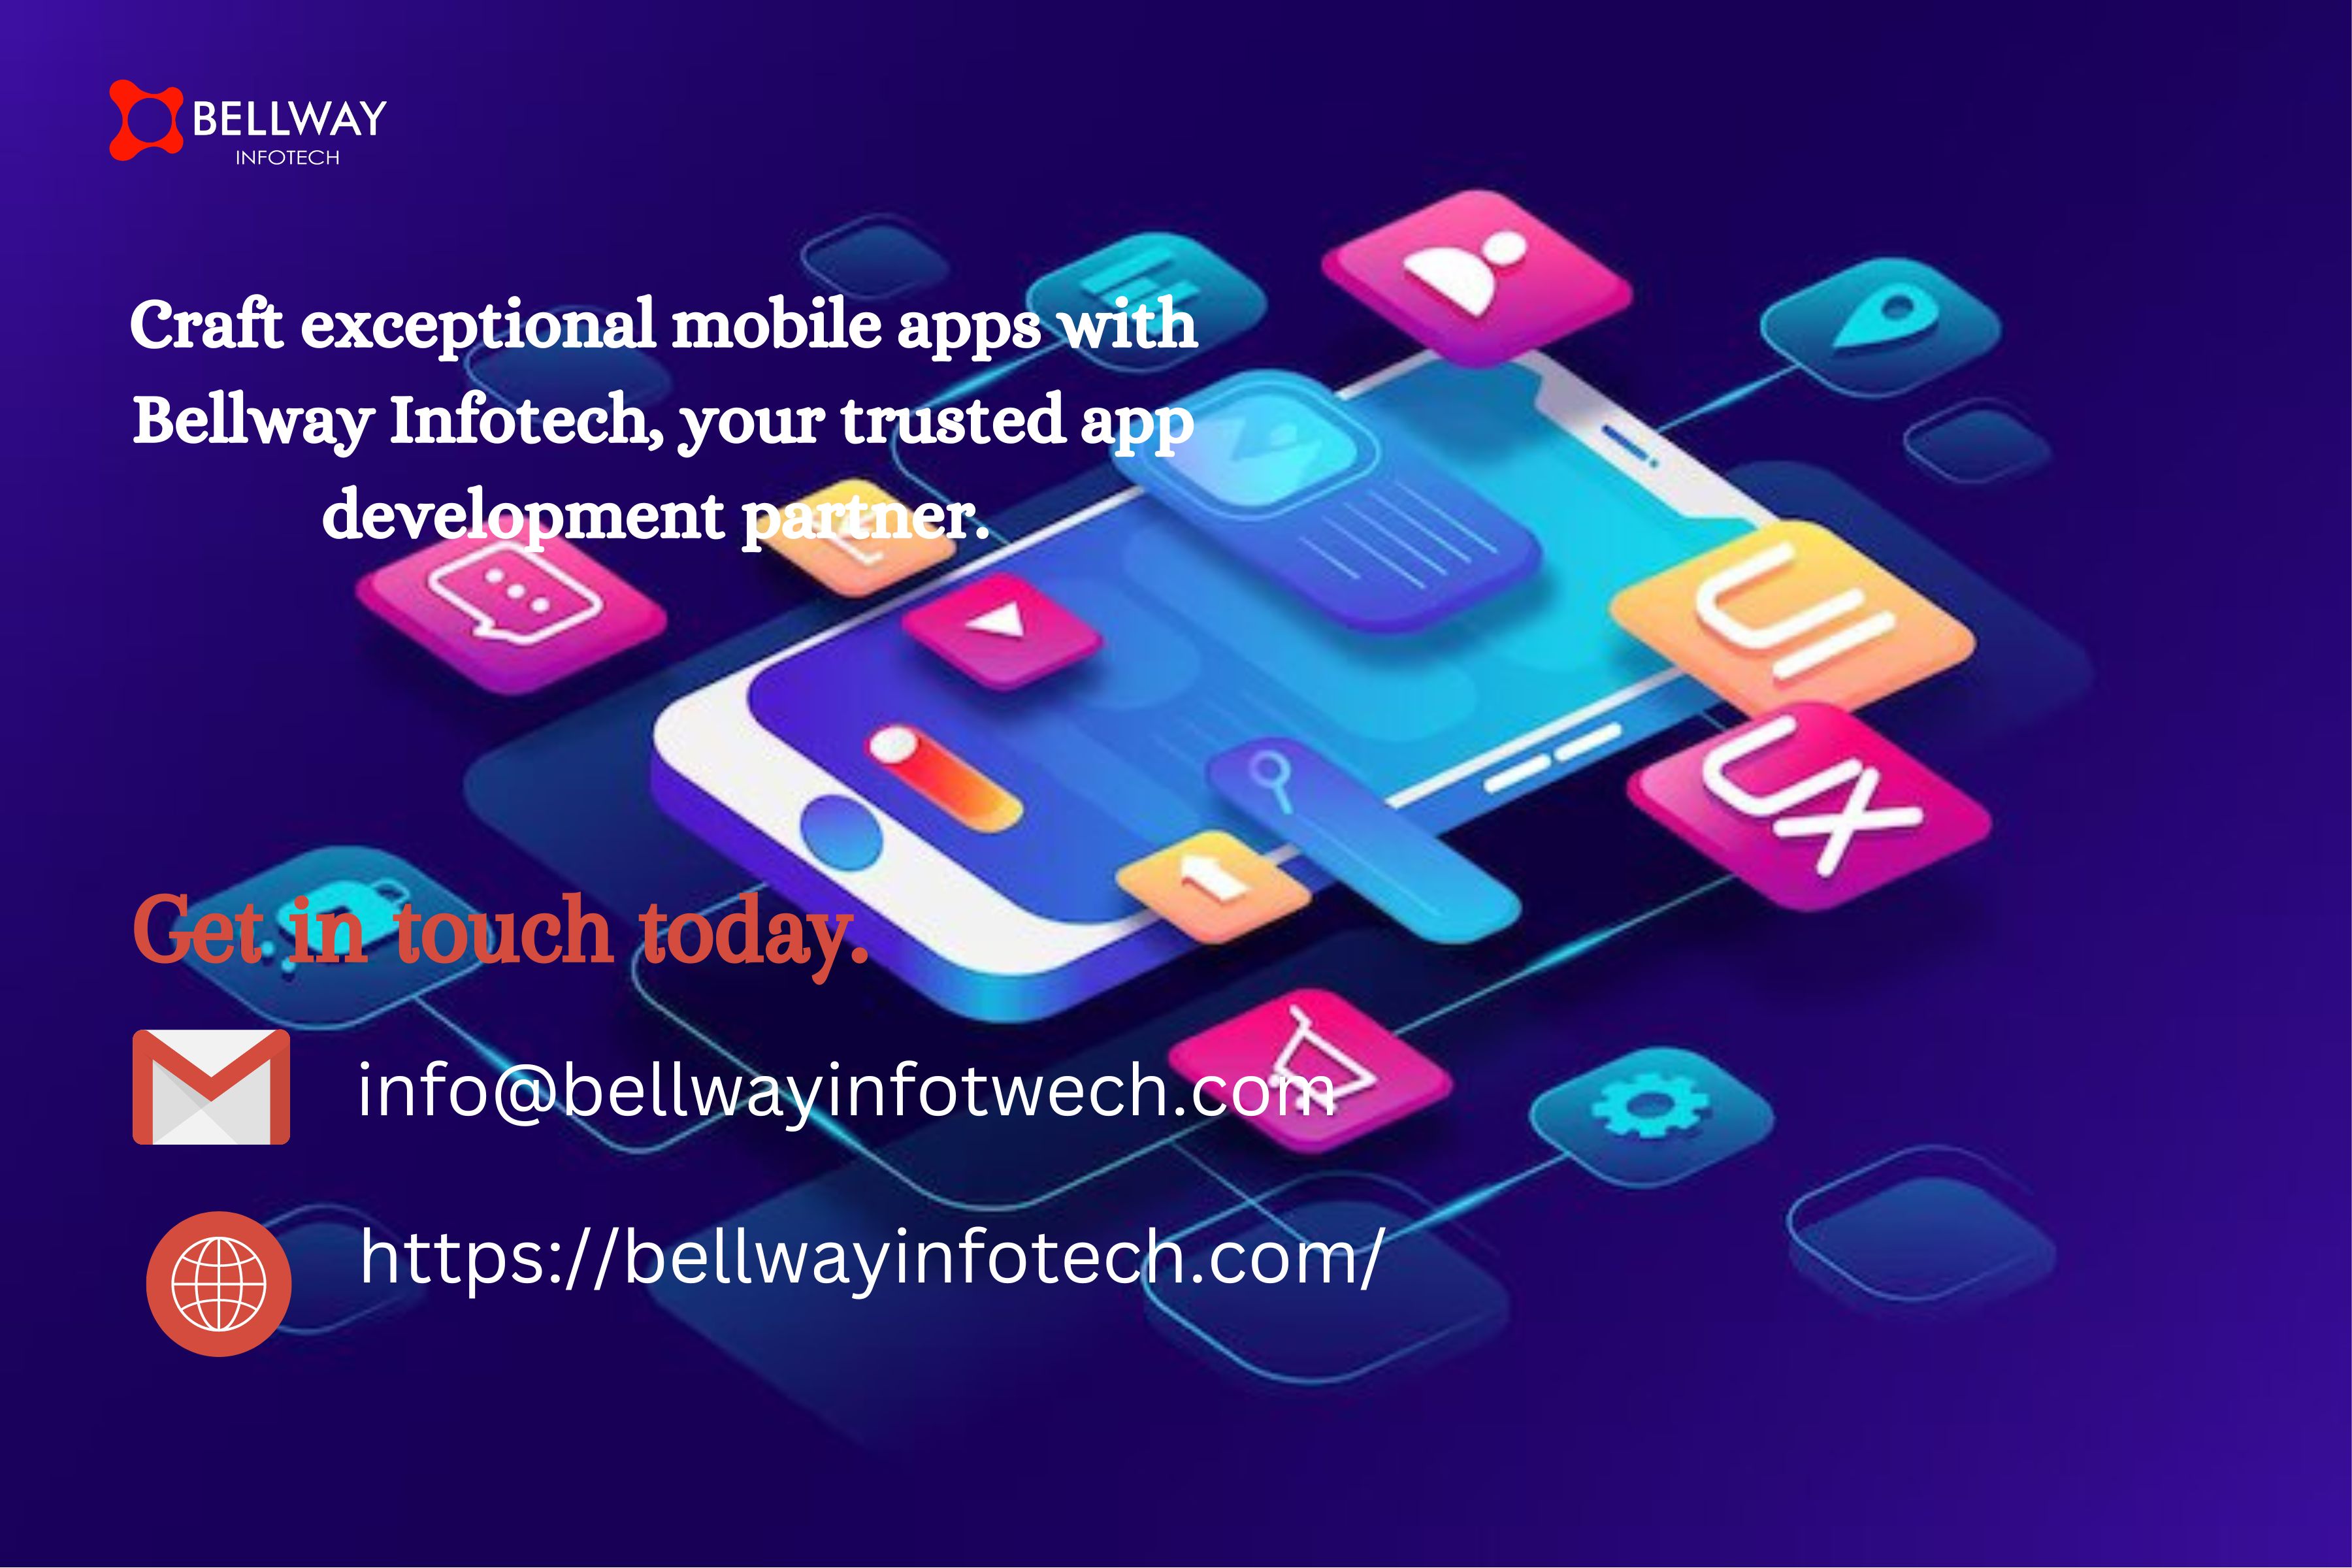 Crafting Exceptional Mobile Applications with Bellway Infotech - Your App Development Partner